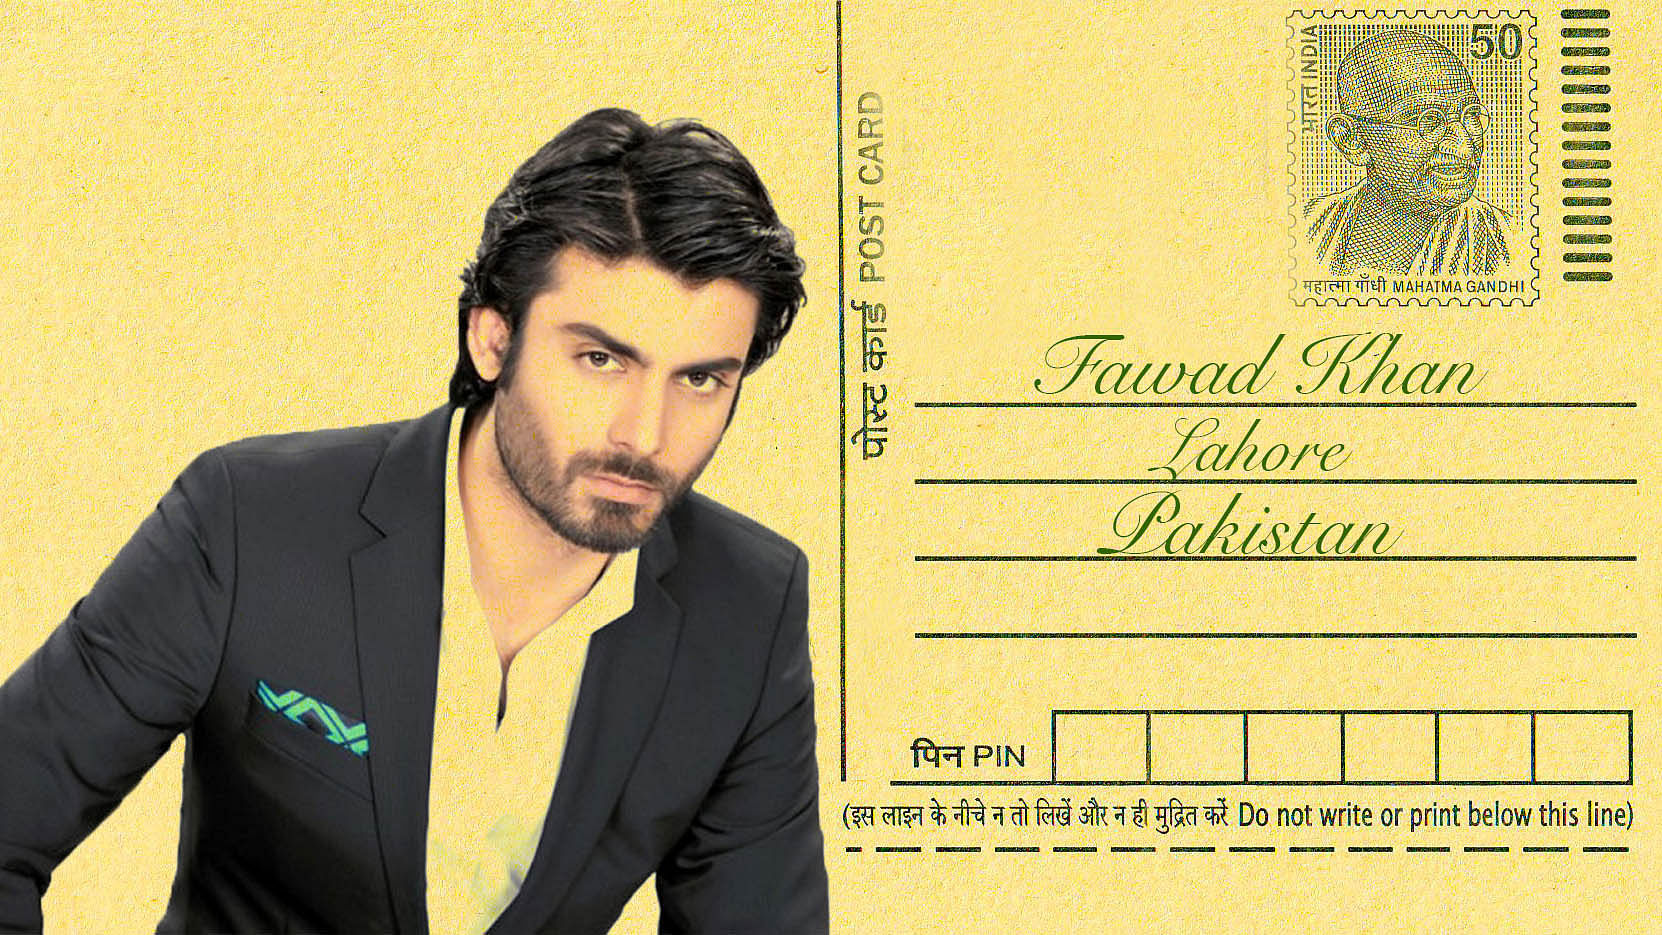 Goodbye Fawad Khan. (Photo courtesy: Twitter; altered by The Quint)